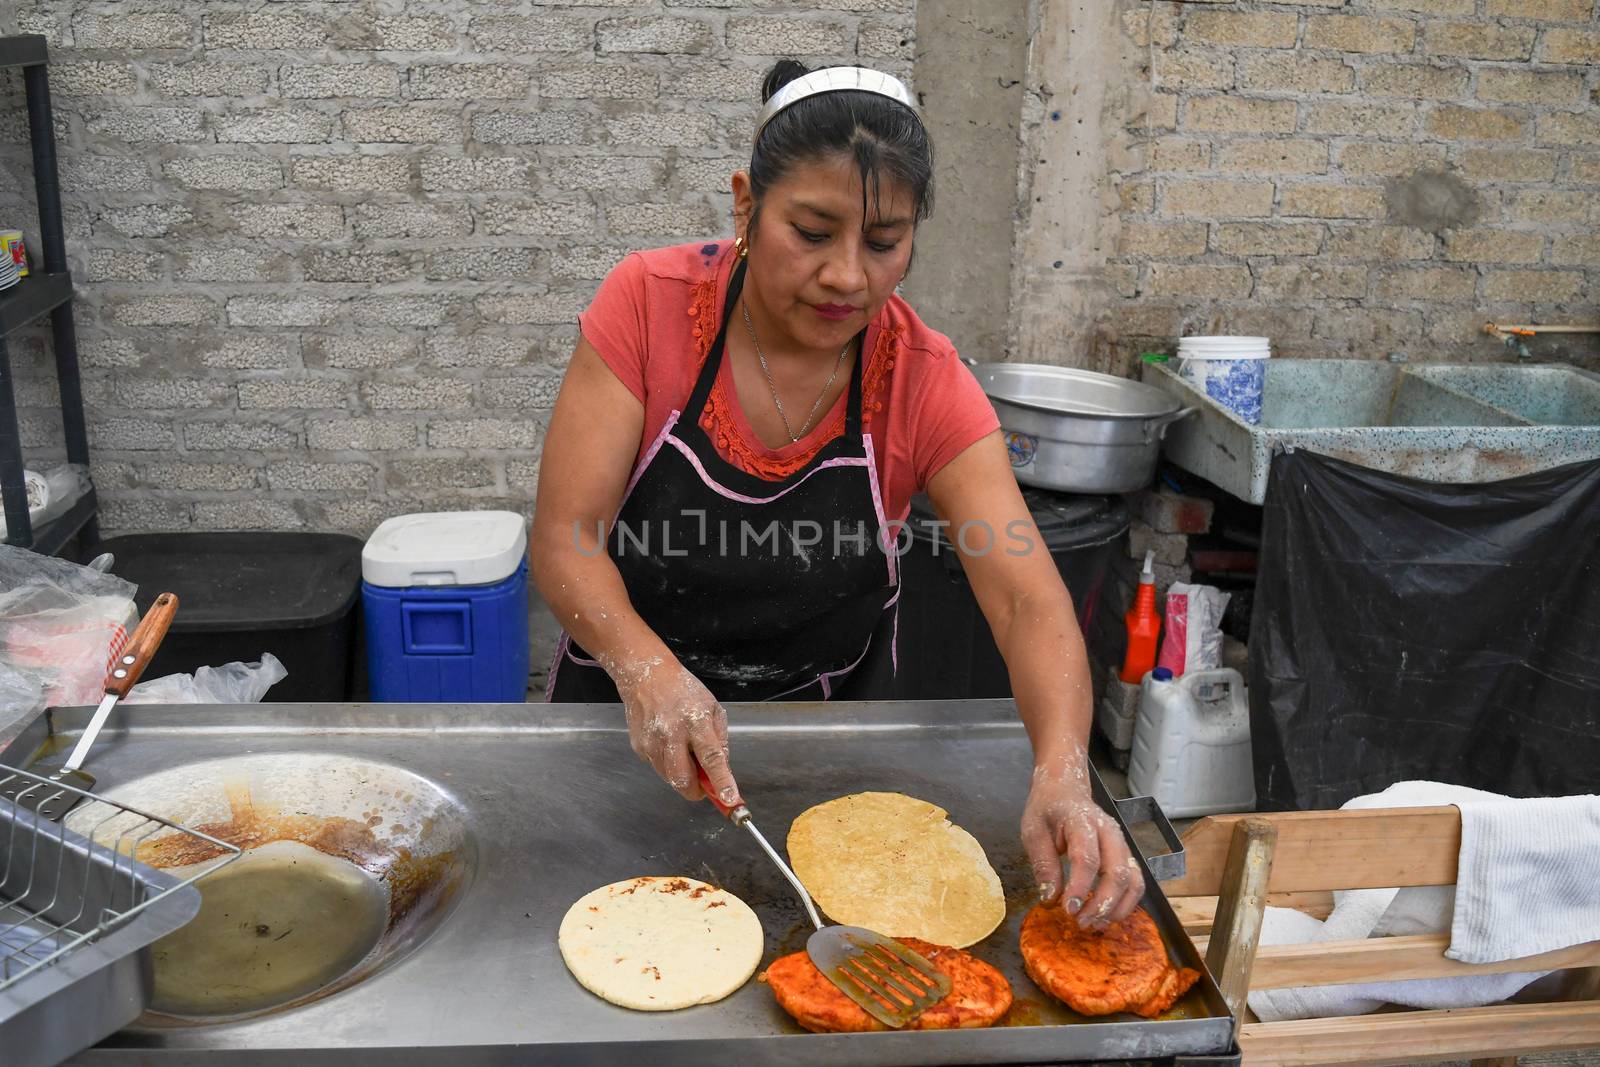 Old woman preparing a typical mexican food with her own hands